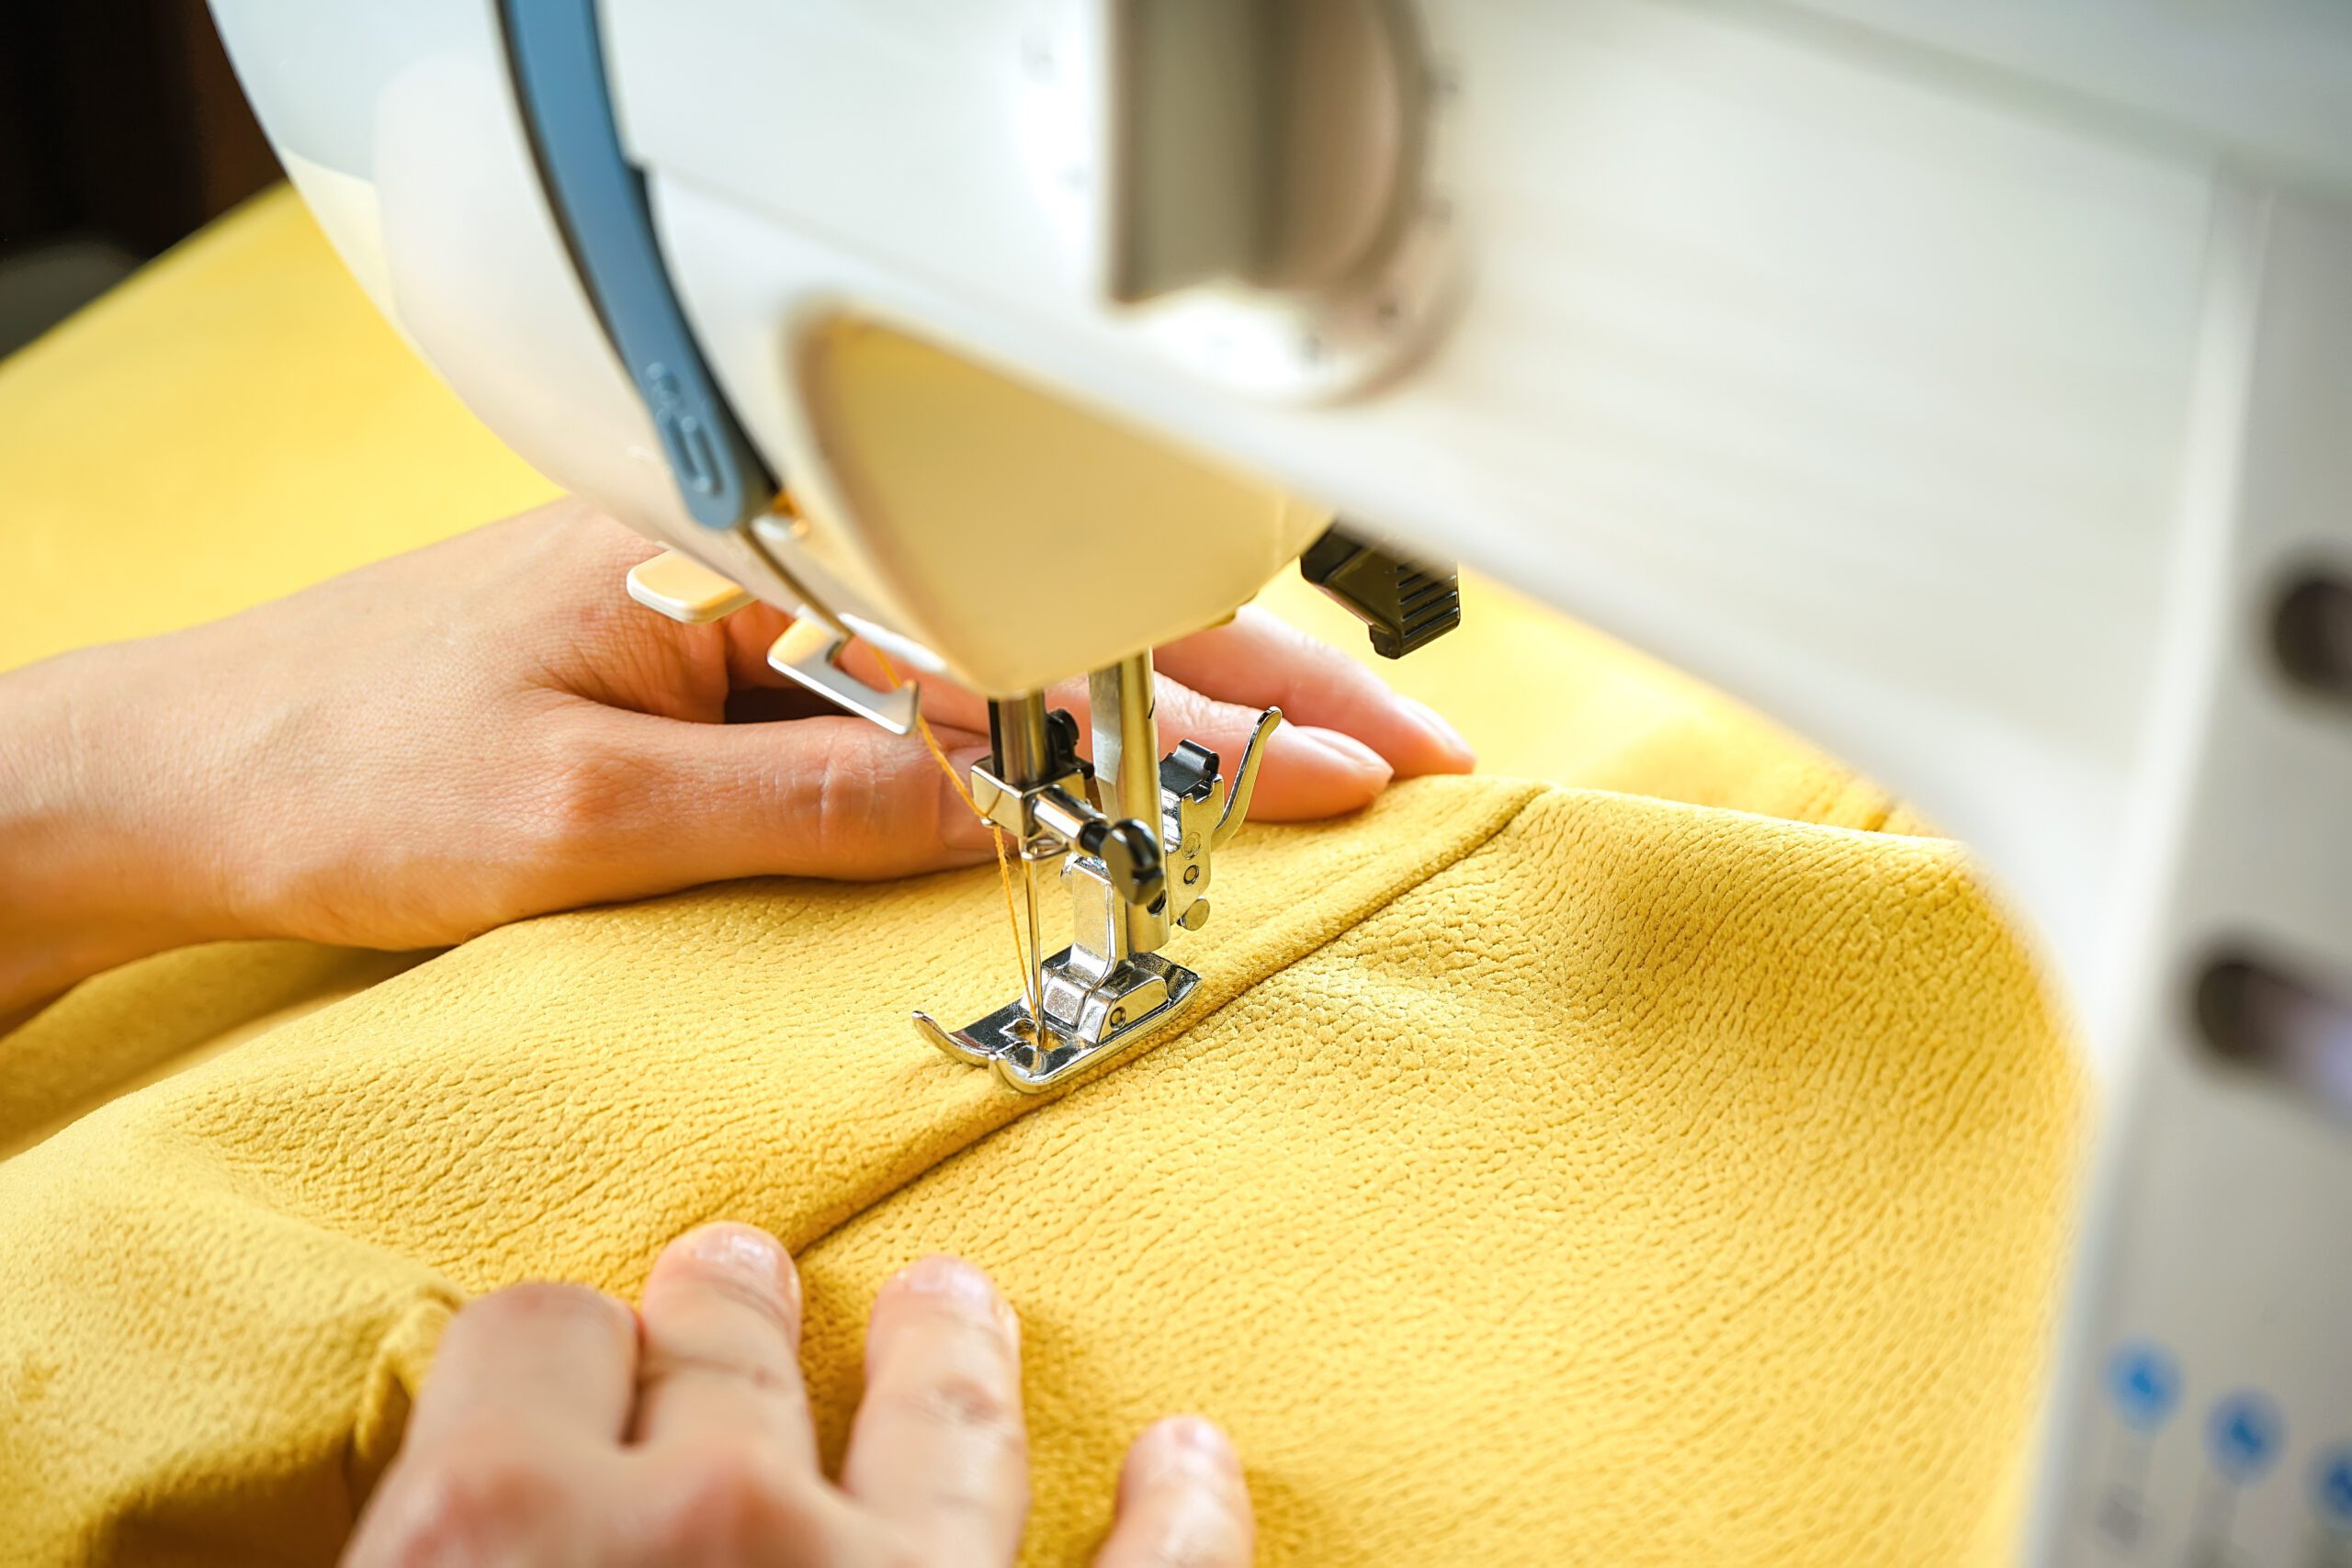 Pair of hands stitching yellow fabric togther with a modern sewing machine.